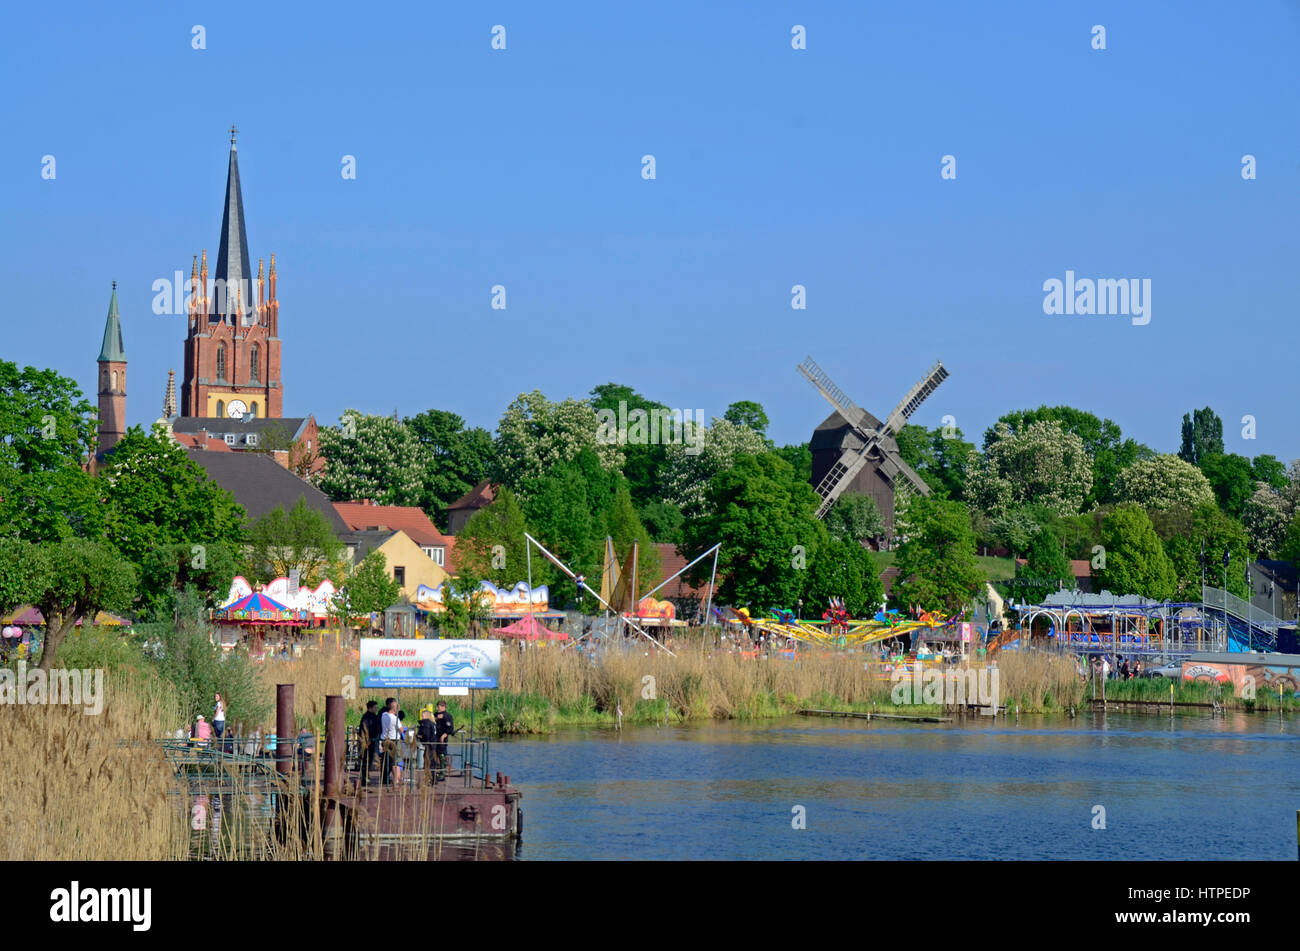 People sitting outside on traditional festival 'Baumblütenfest', Werder (Havel), Brandenburg, Germany, Europe Stock Photo